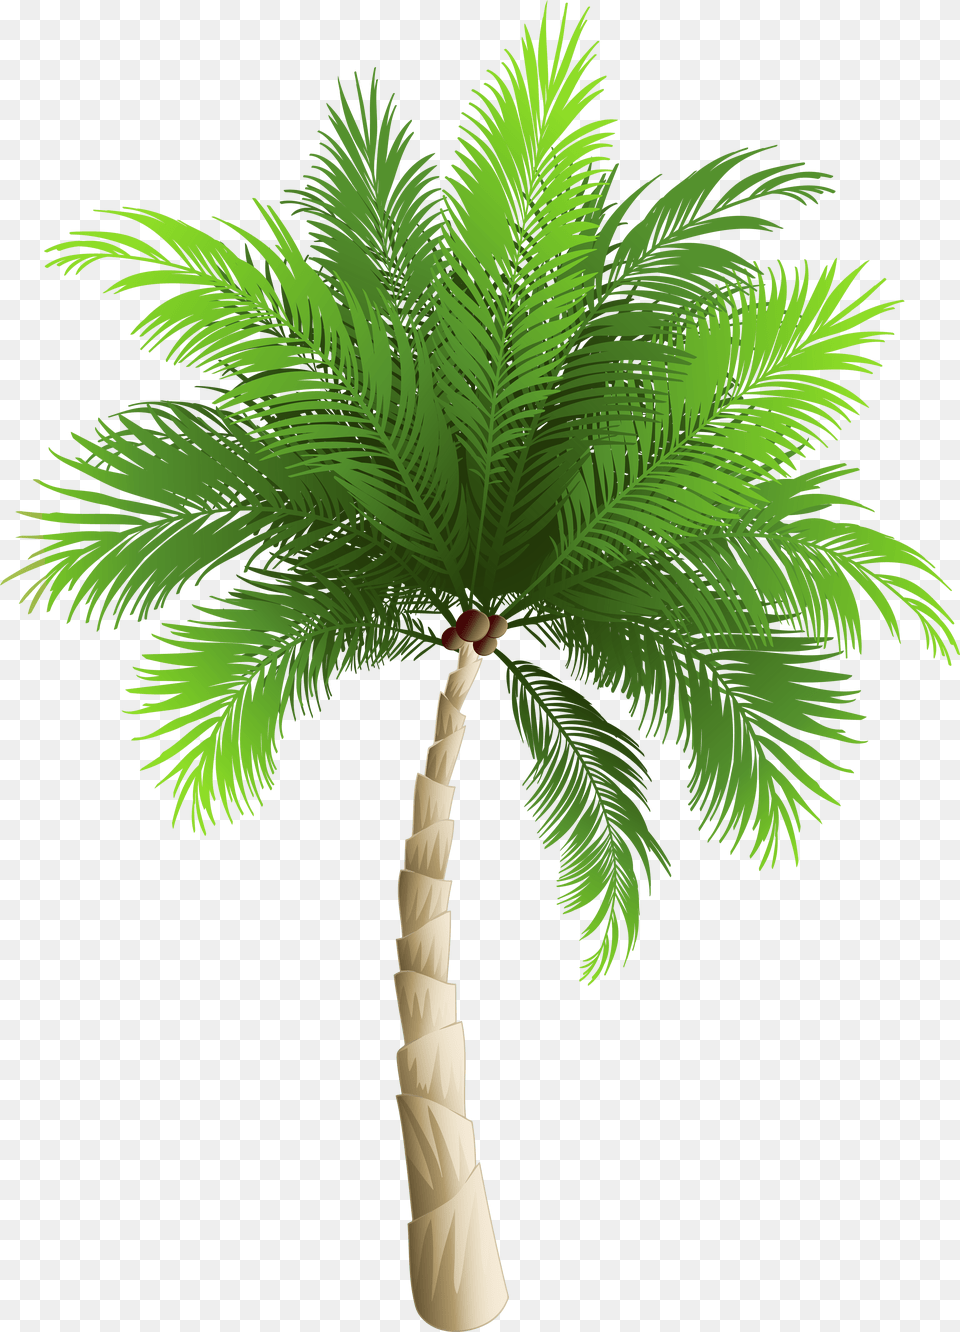 Palm Trees Date Palm Phoenix Canariensis Coconut In Coconut Tree Free Png Download